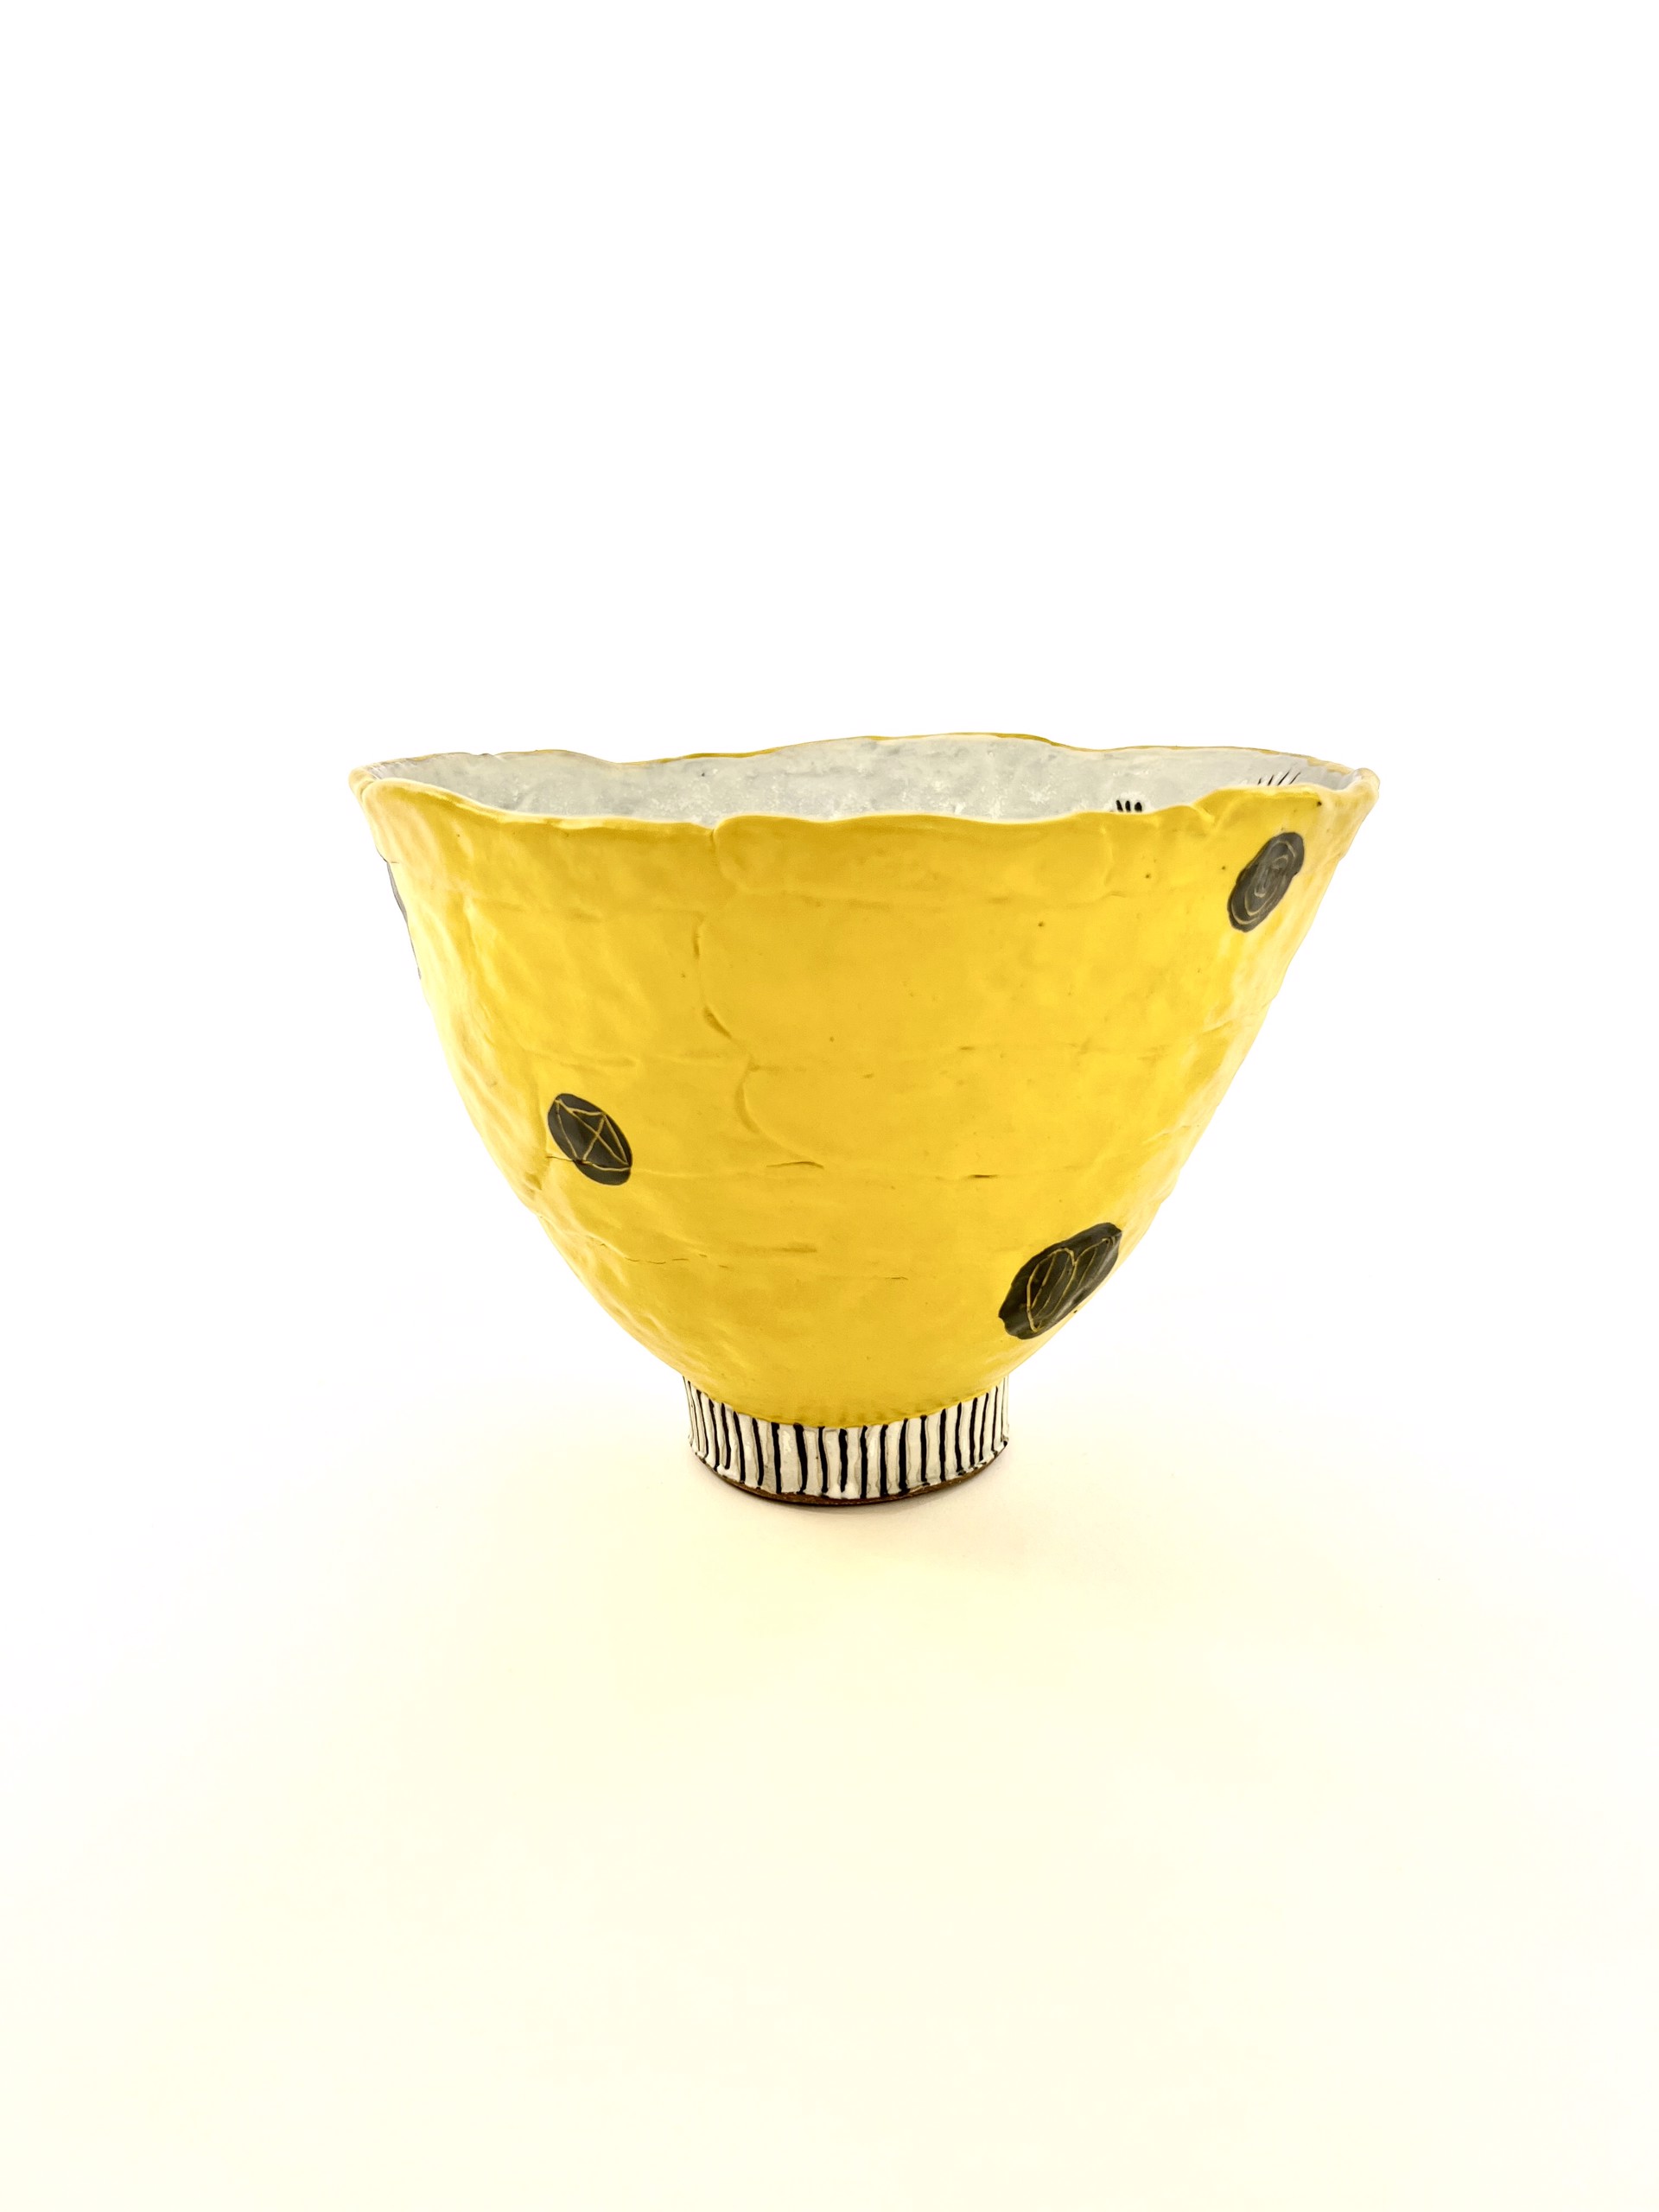 Bowl -  Yellow and Black Scorpion by Curtis Hoard